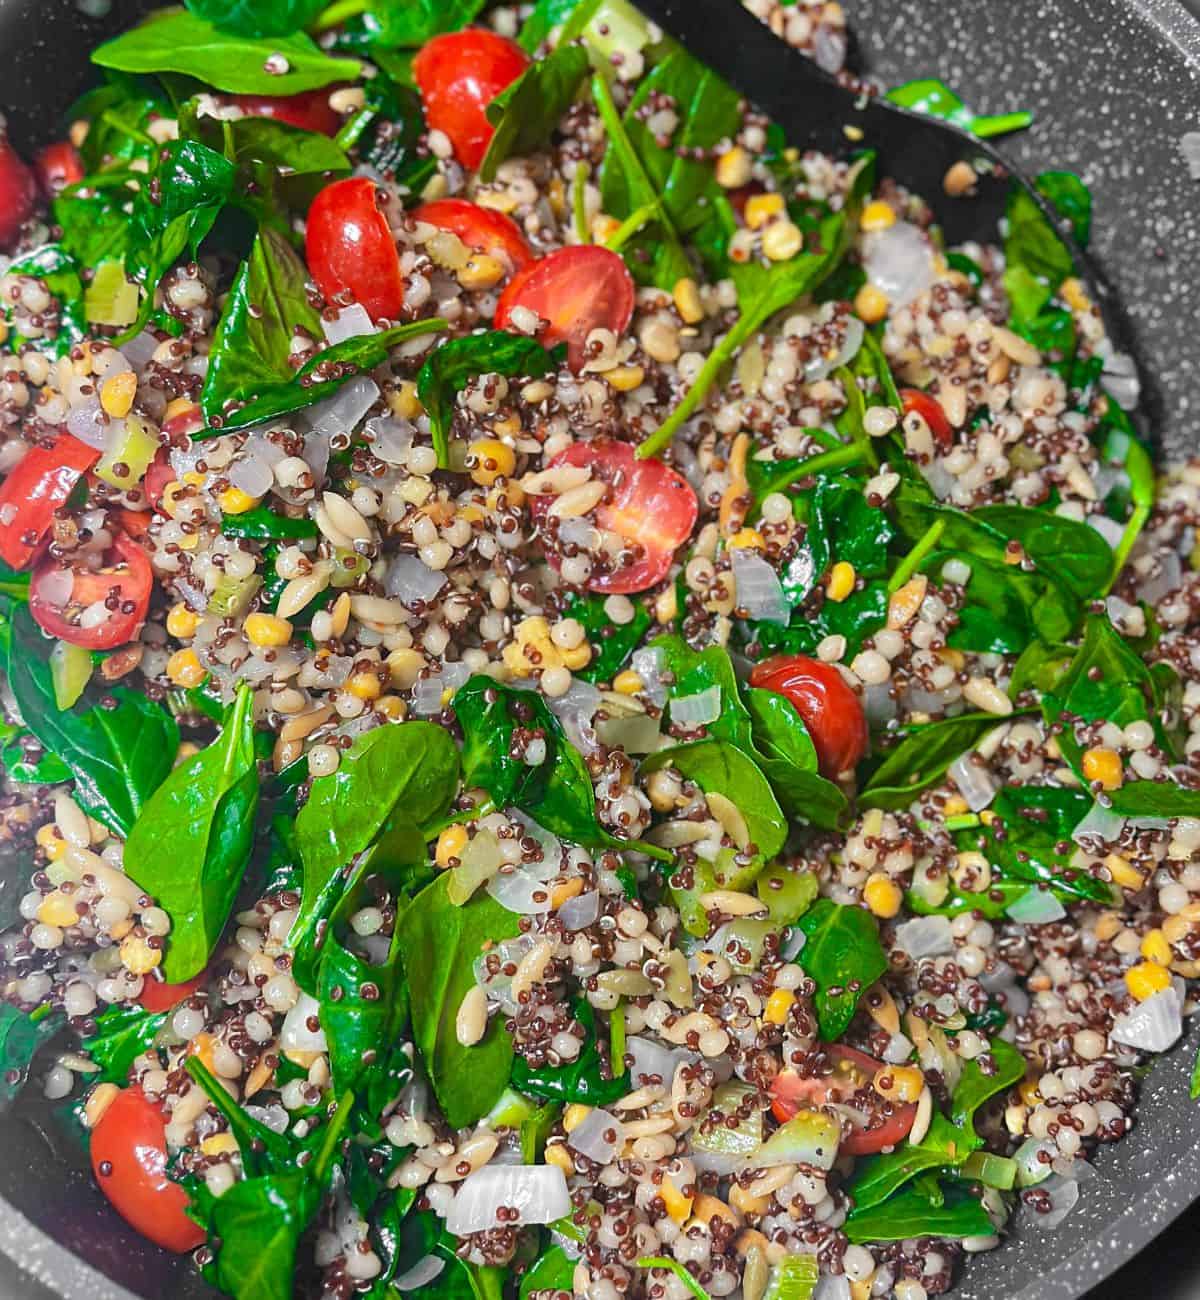 Trader Joe's Harvest Blend grains being mixed with fresh spinach leaves and halved cherry tomatoes in a pan